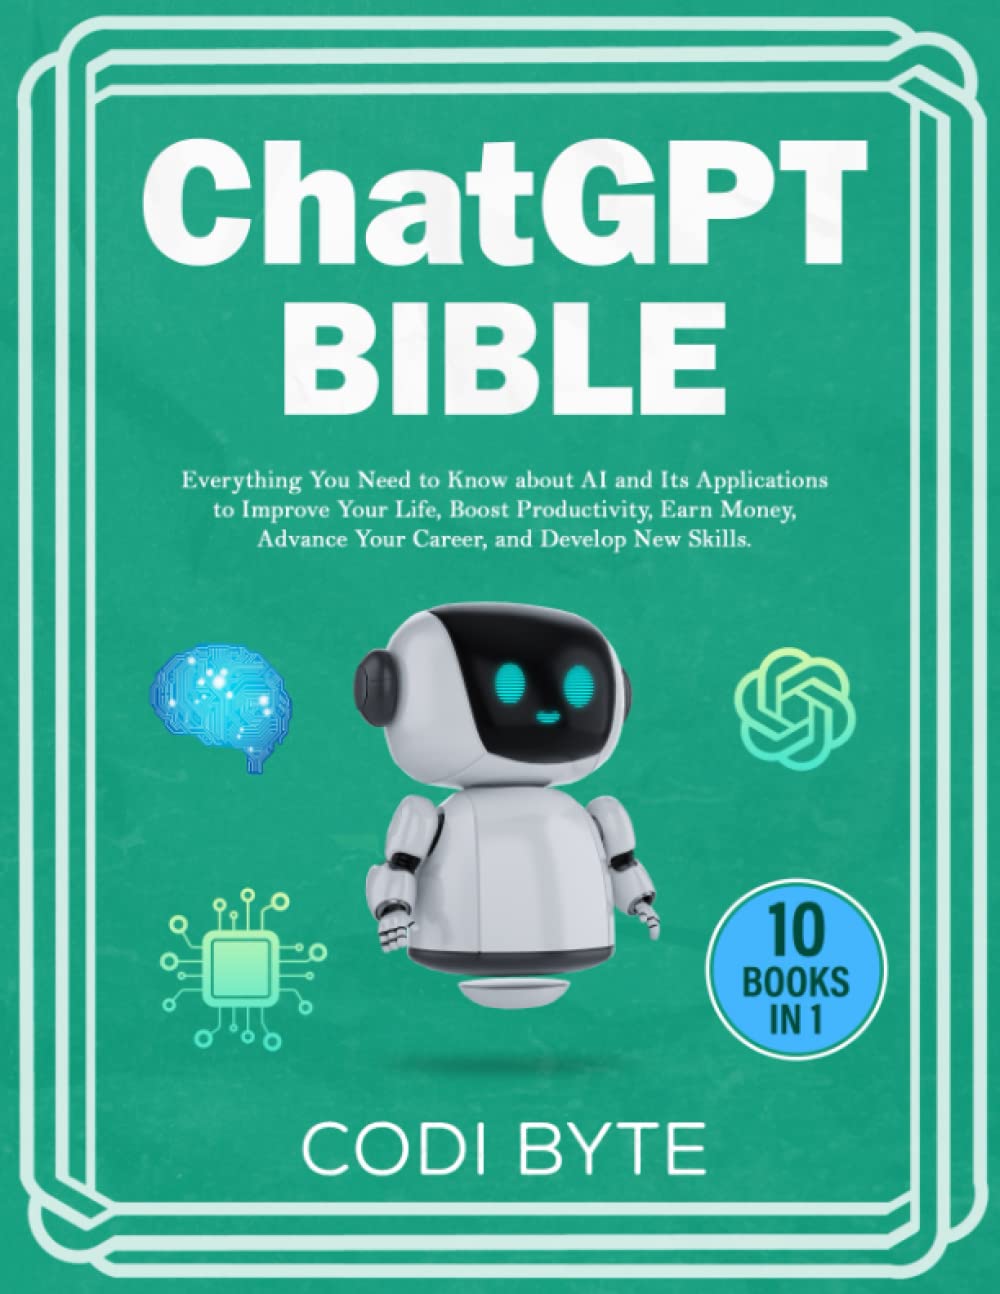 Chat GPT Bible - 10 Books in 1: Everything You Need to Know about AI and Its Applications to Improve Your Life, Boost Productivity, Earn Money, Advance Your Career, and Develop New Skills.